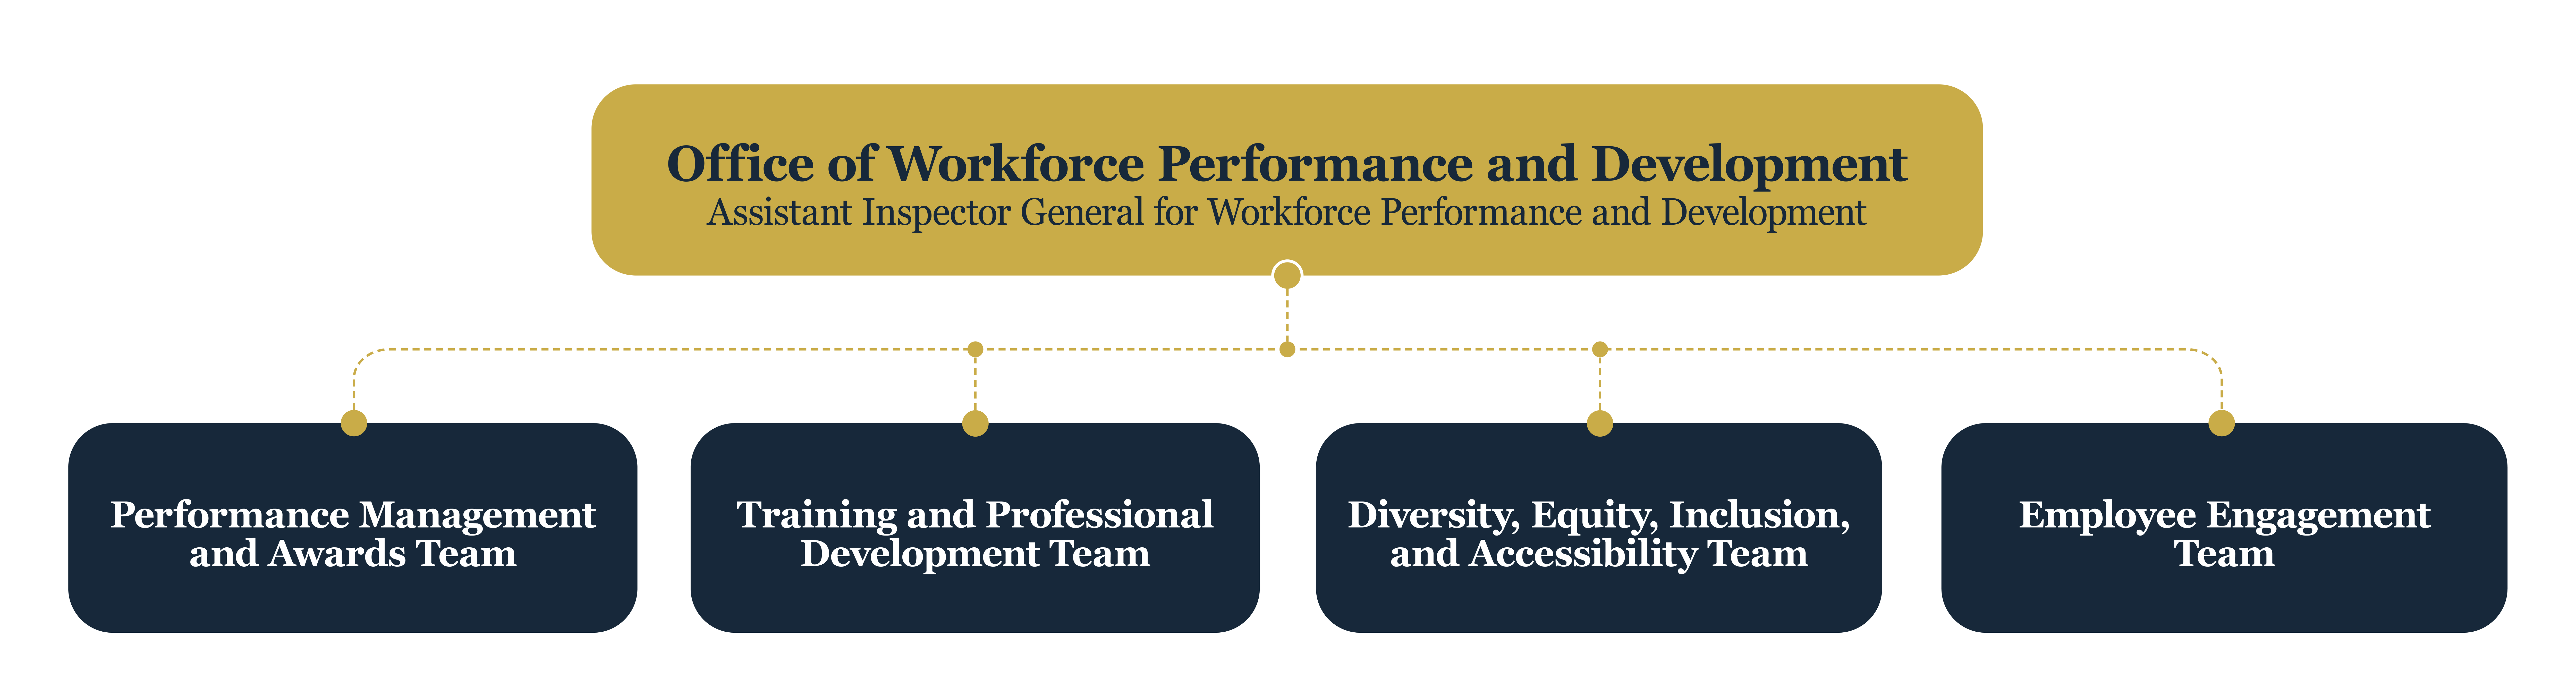 office of workforce performance and development